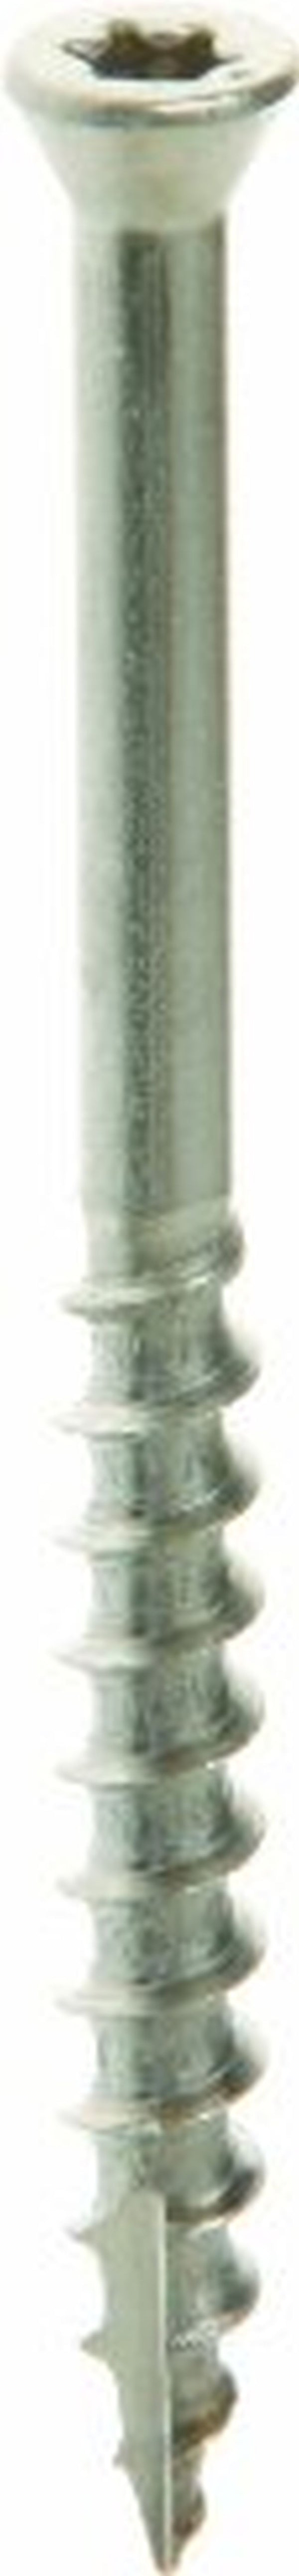 Grip Rite MAXS158THW3055 #10 x 2-1/2 in. x Stainless Steel Deck Screw (5 lb.Pack)